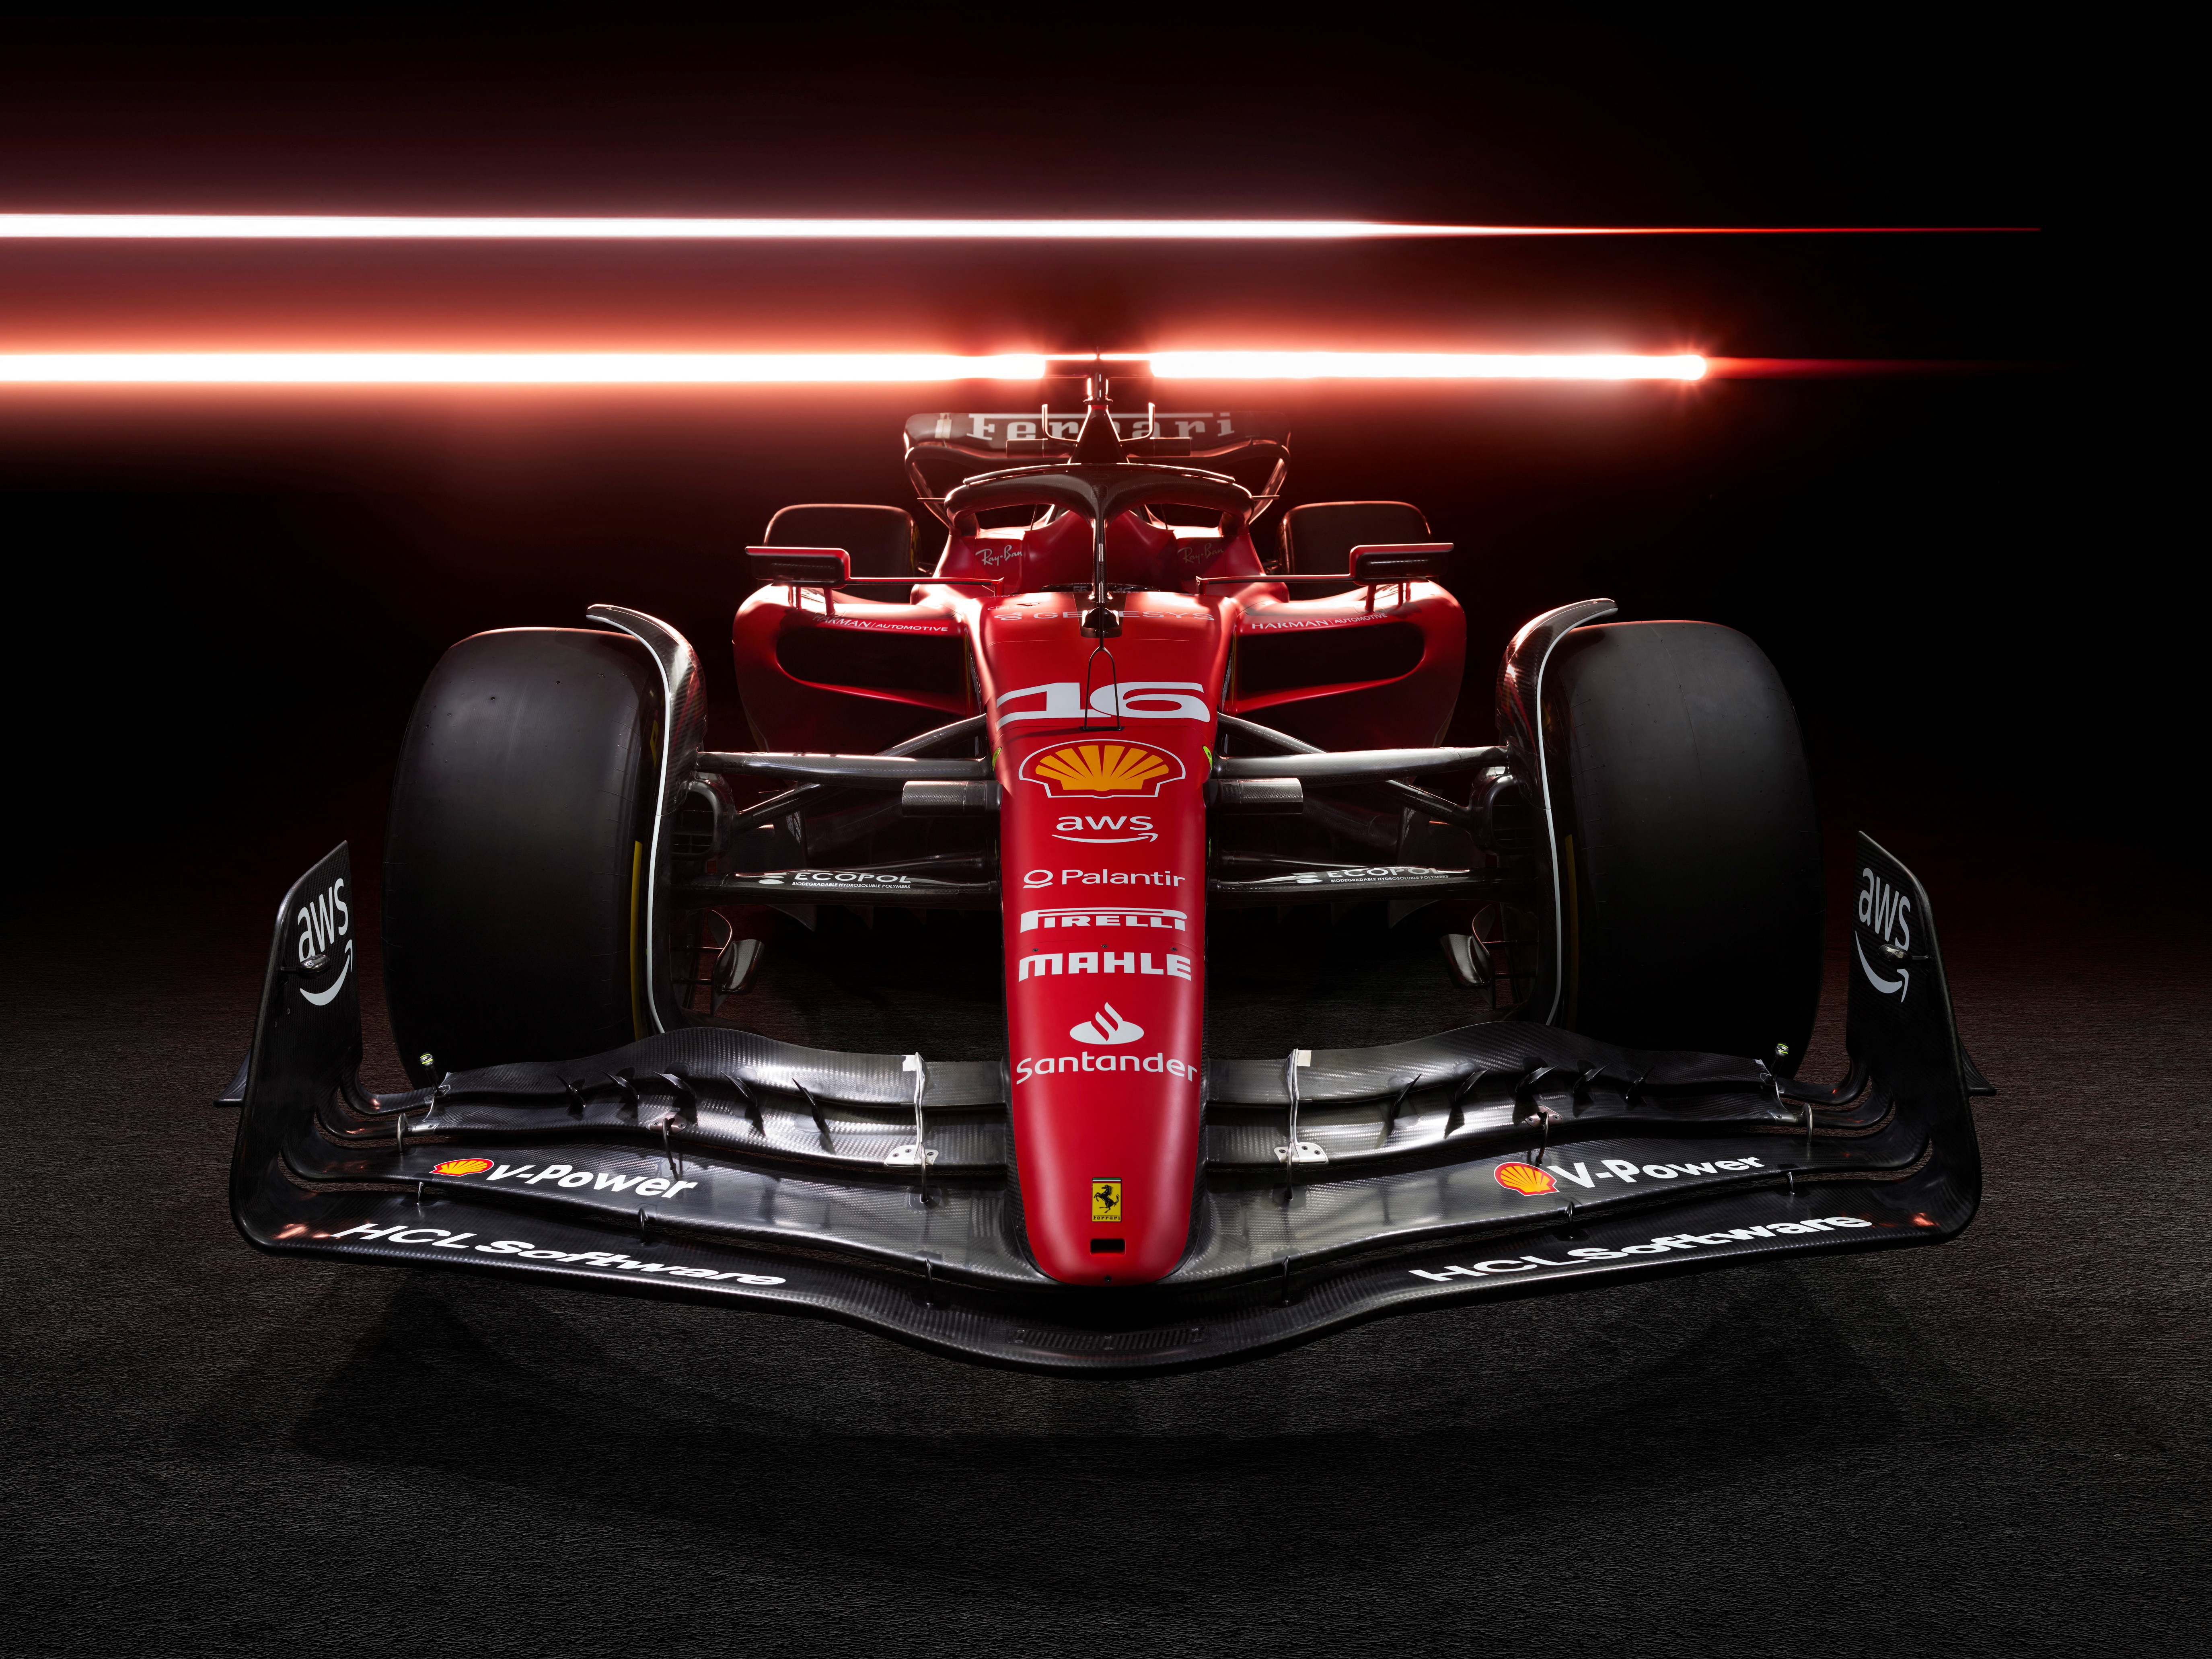 Charles Leclerc aims for F1 crown in Ferrari's new car for 2023